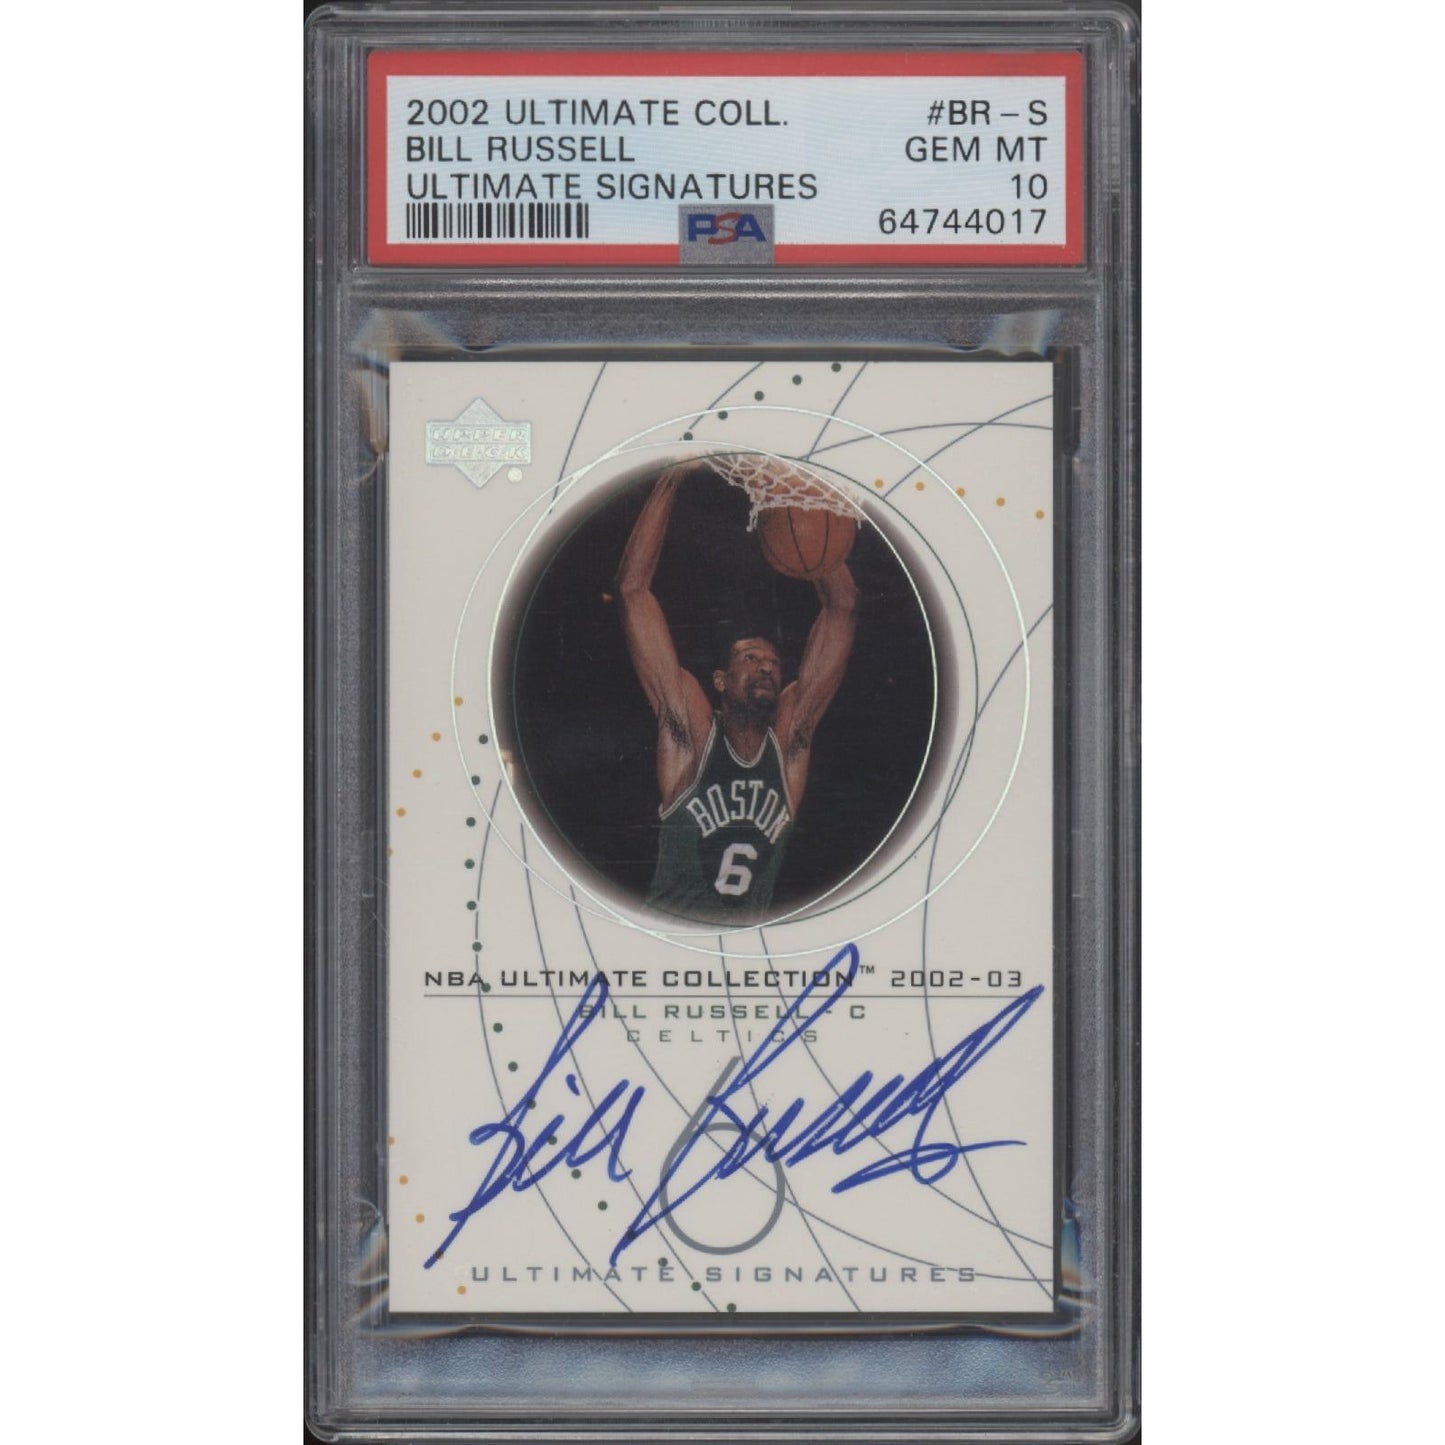 2002-03 UD Ultimate Collection Bill Russell Signatures #BRS PSA 10